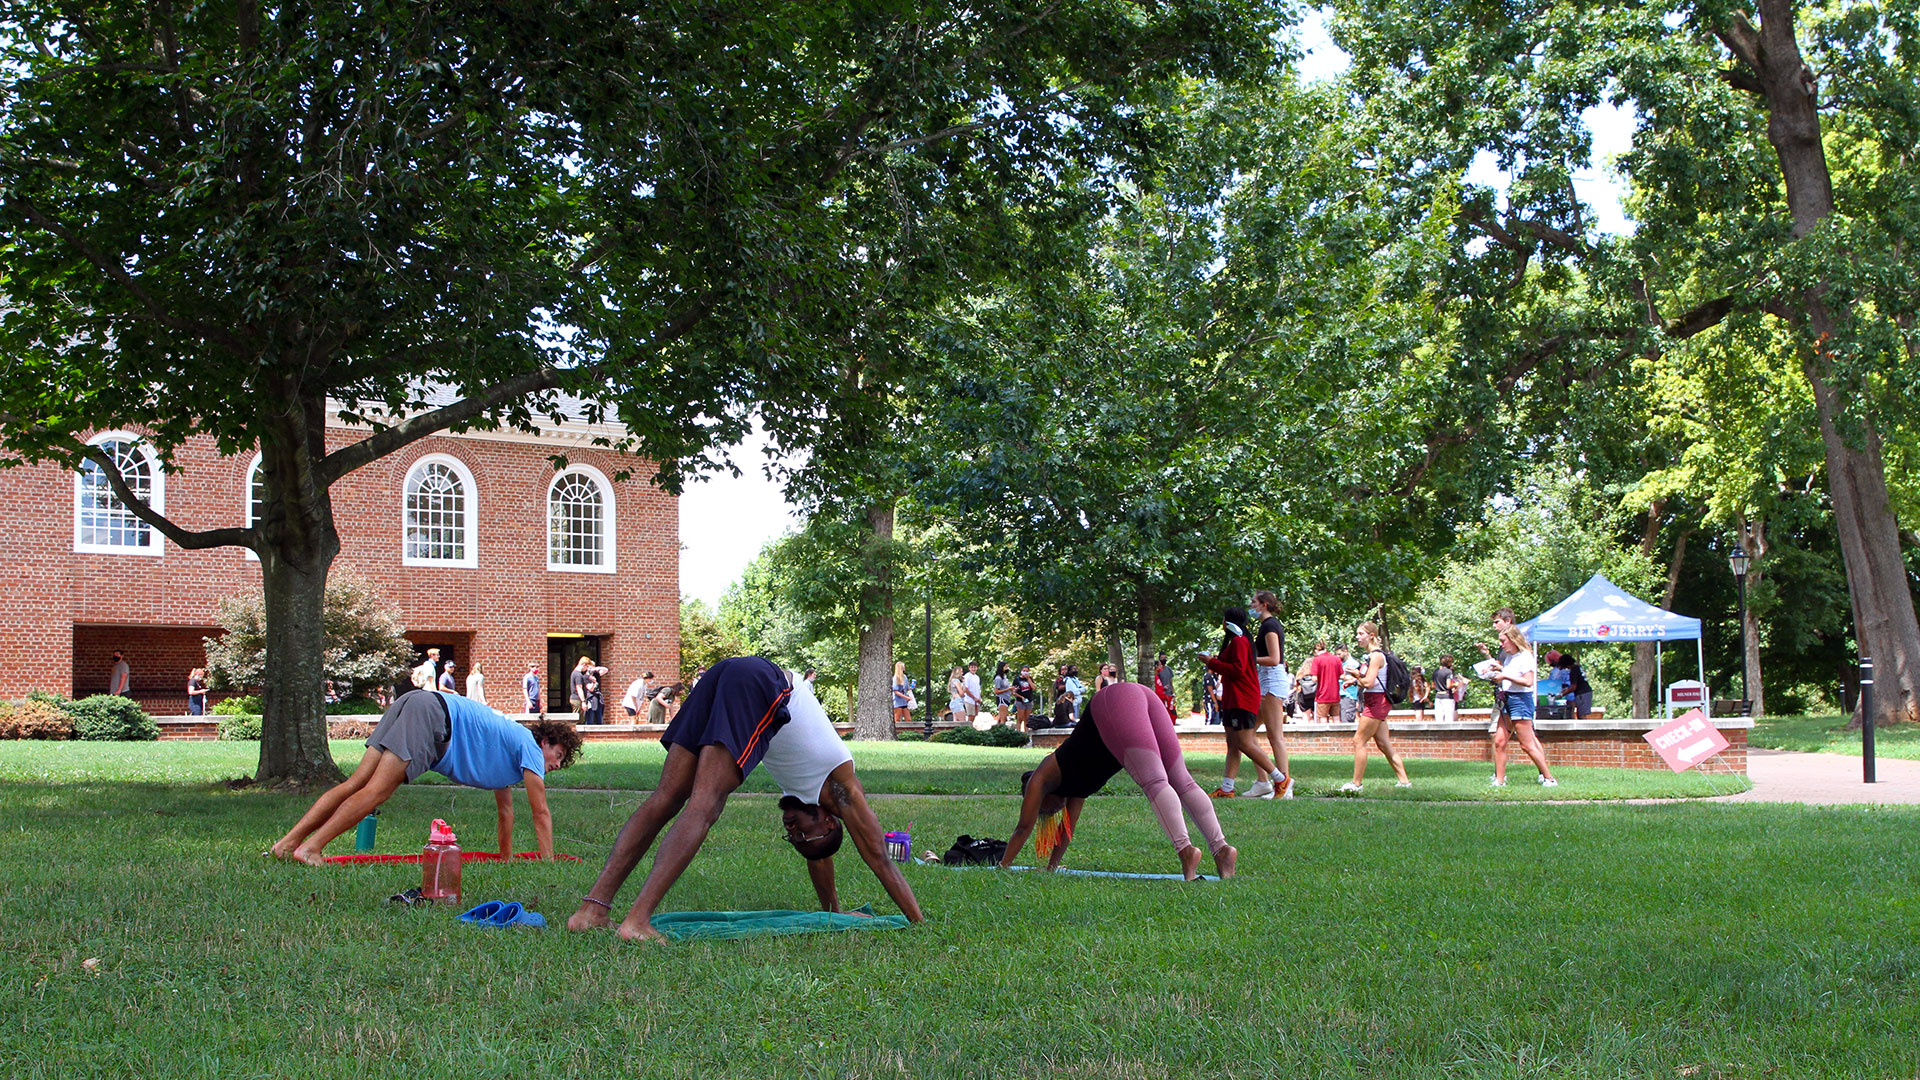 Three students practice their downward dog pose during Yoga on the Quad.